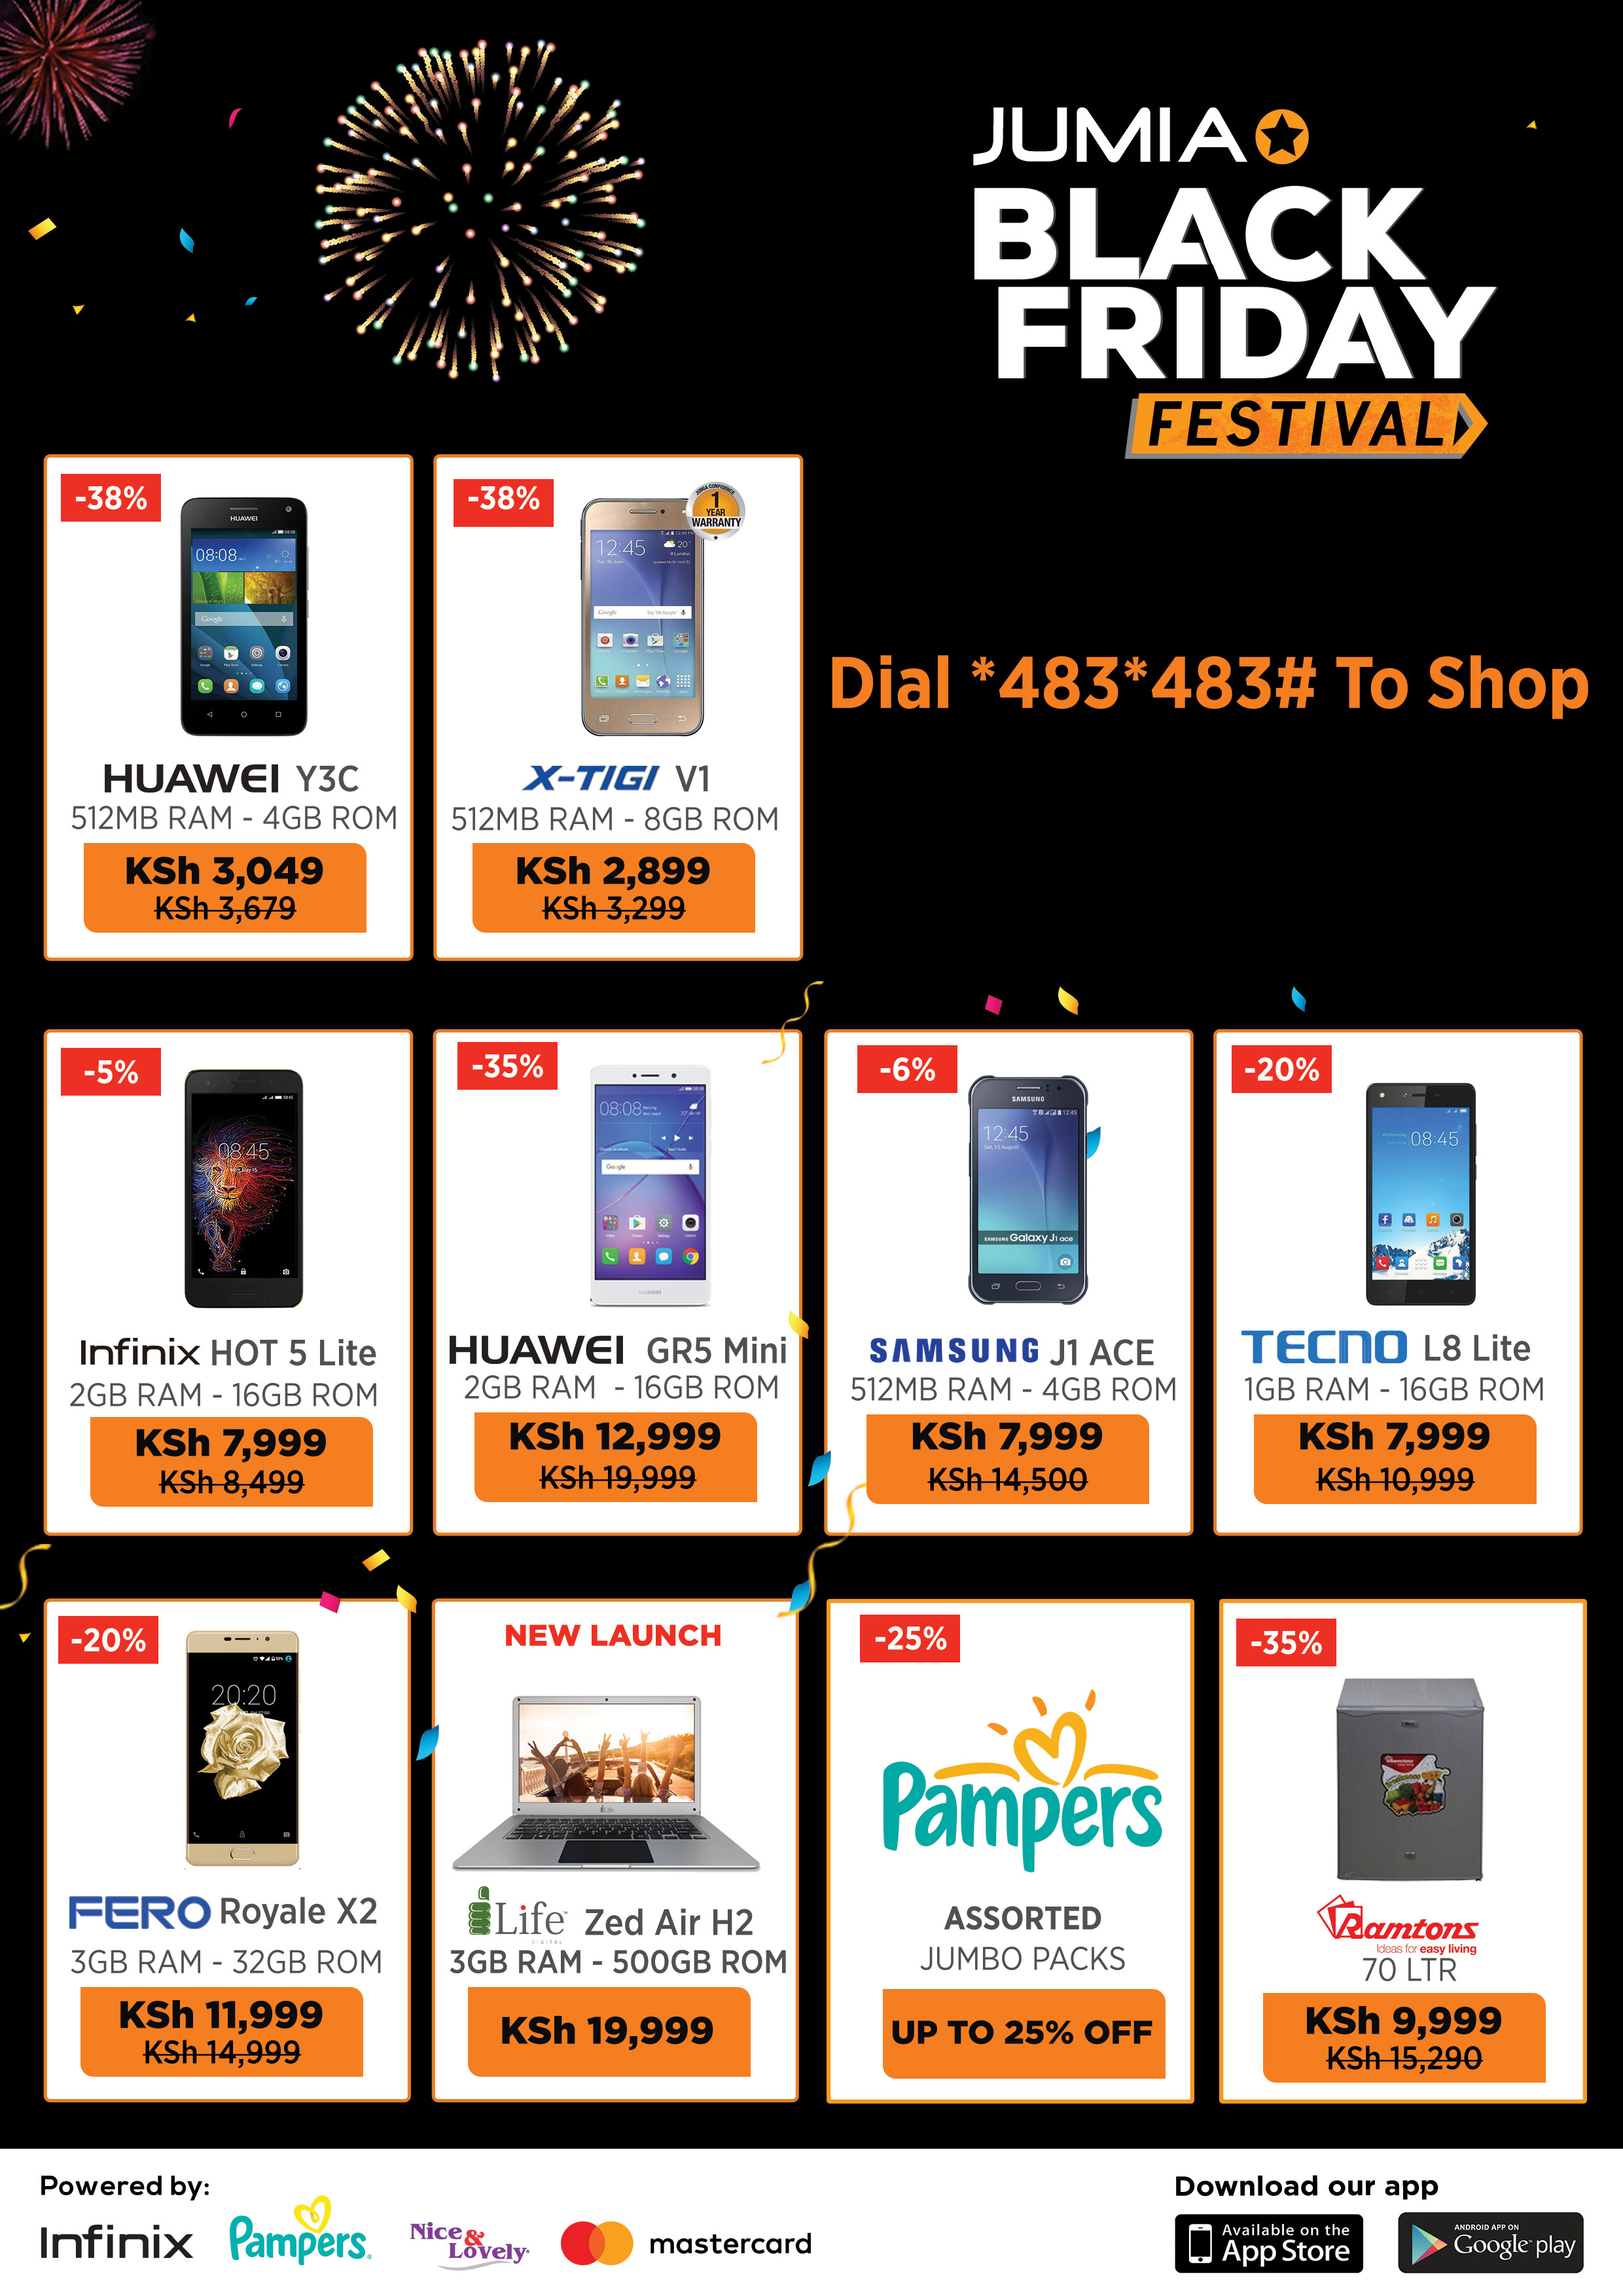 You can now place your Jumia Black Friday orders via USSD - Does Models Do Black Friday Deals